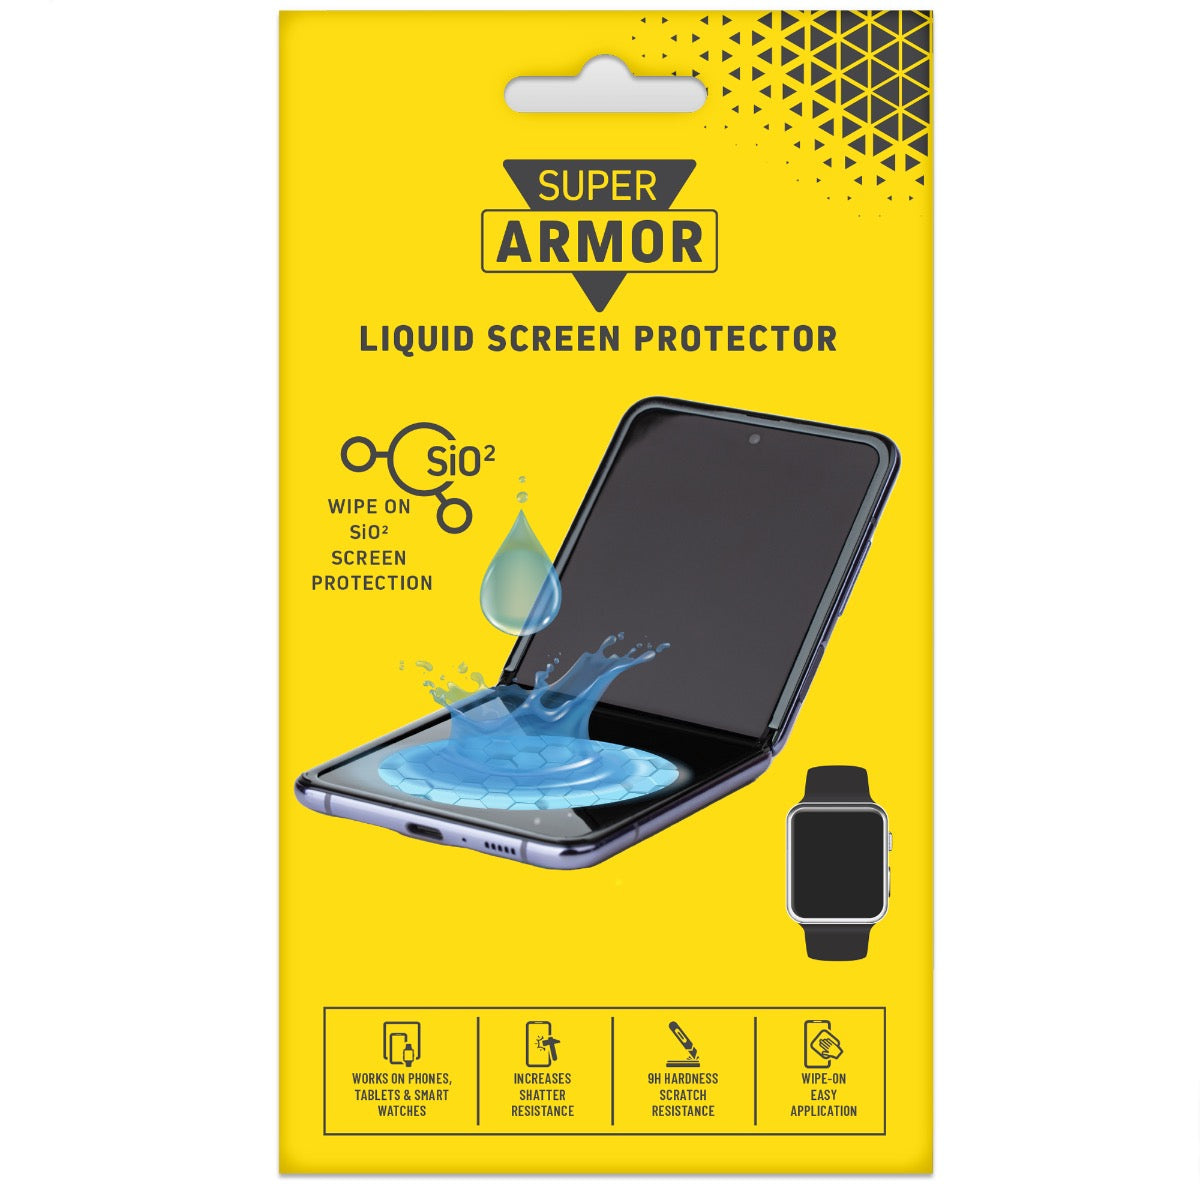 SUPER ARMOR Liquid Screen Protector for All Phones Tablets and Smart Watches